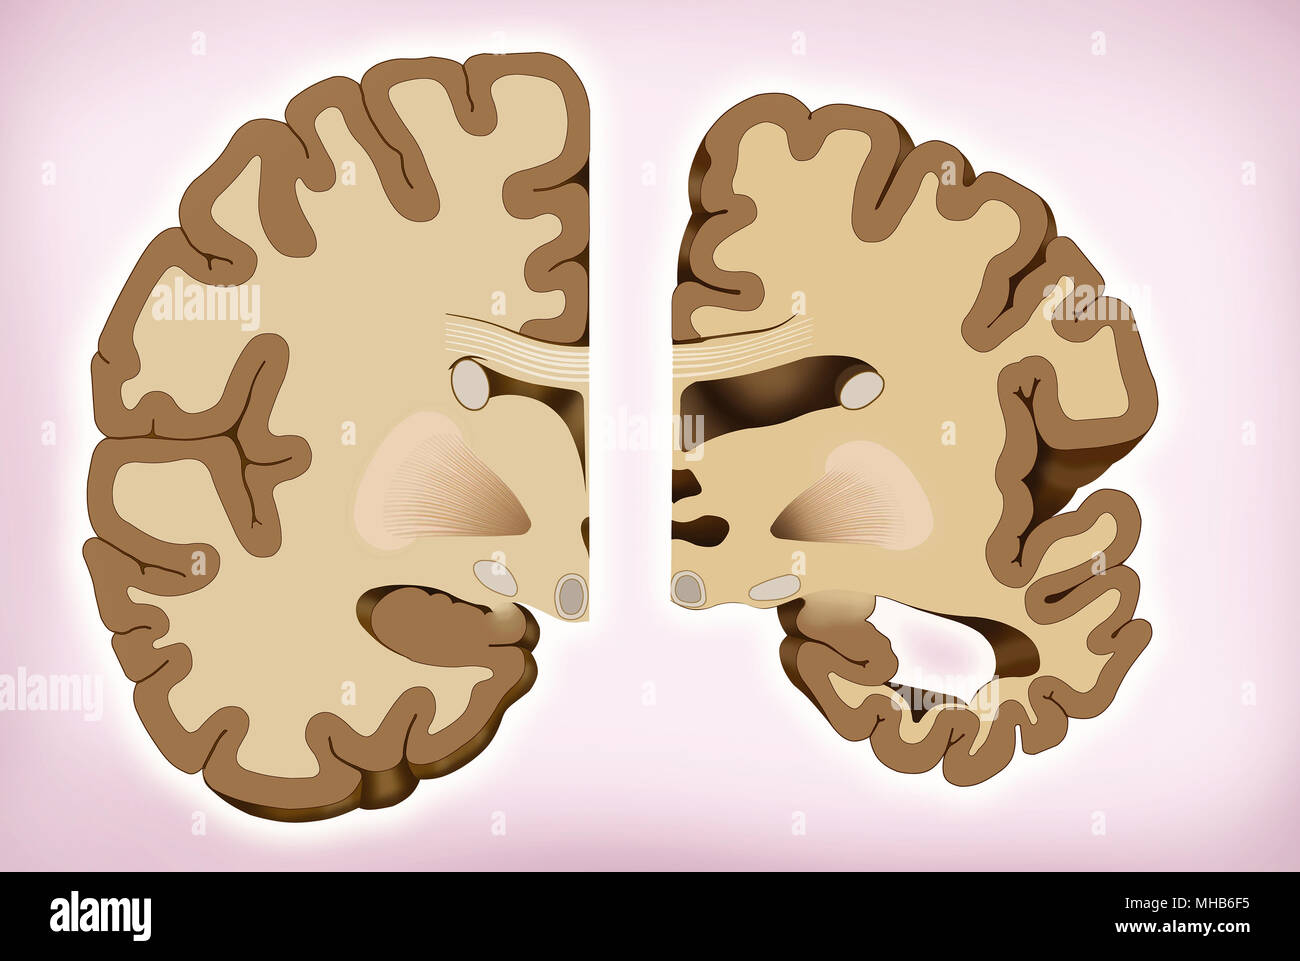 Brain difference in Alzheimer's. Stock Photo